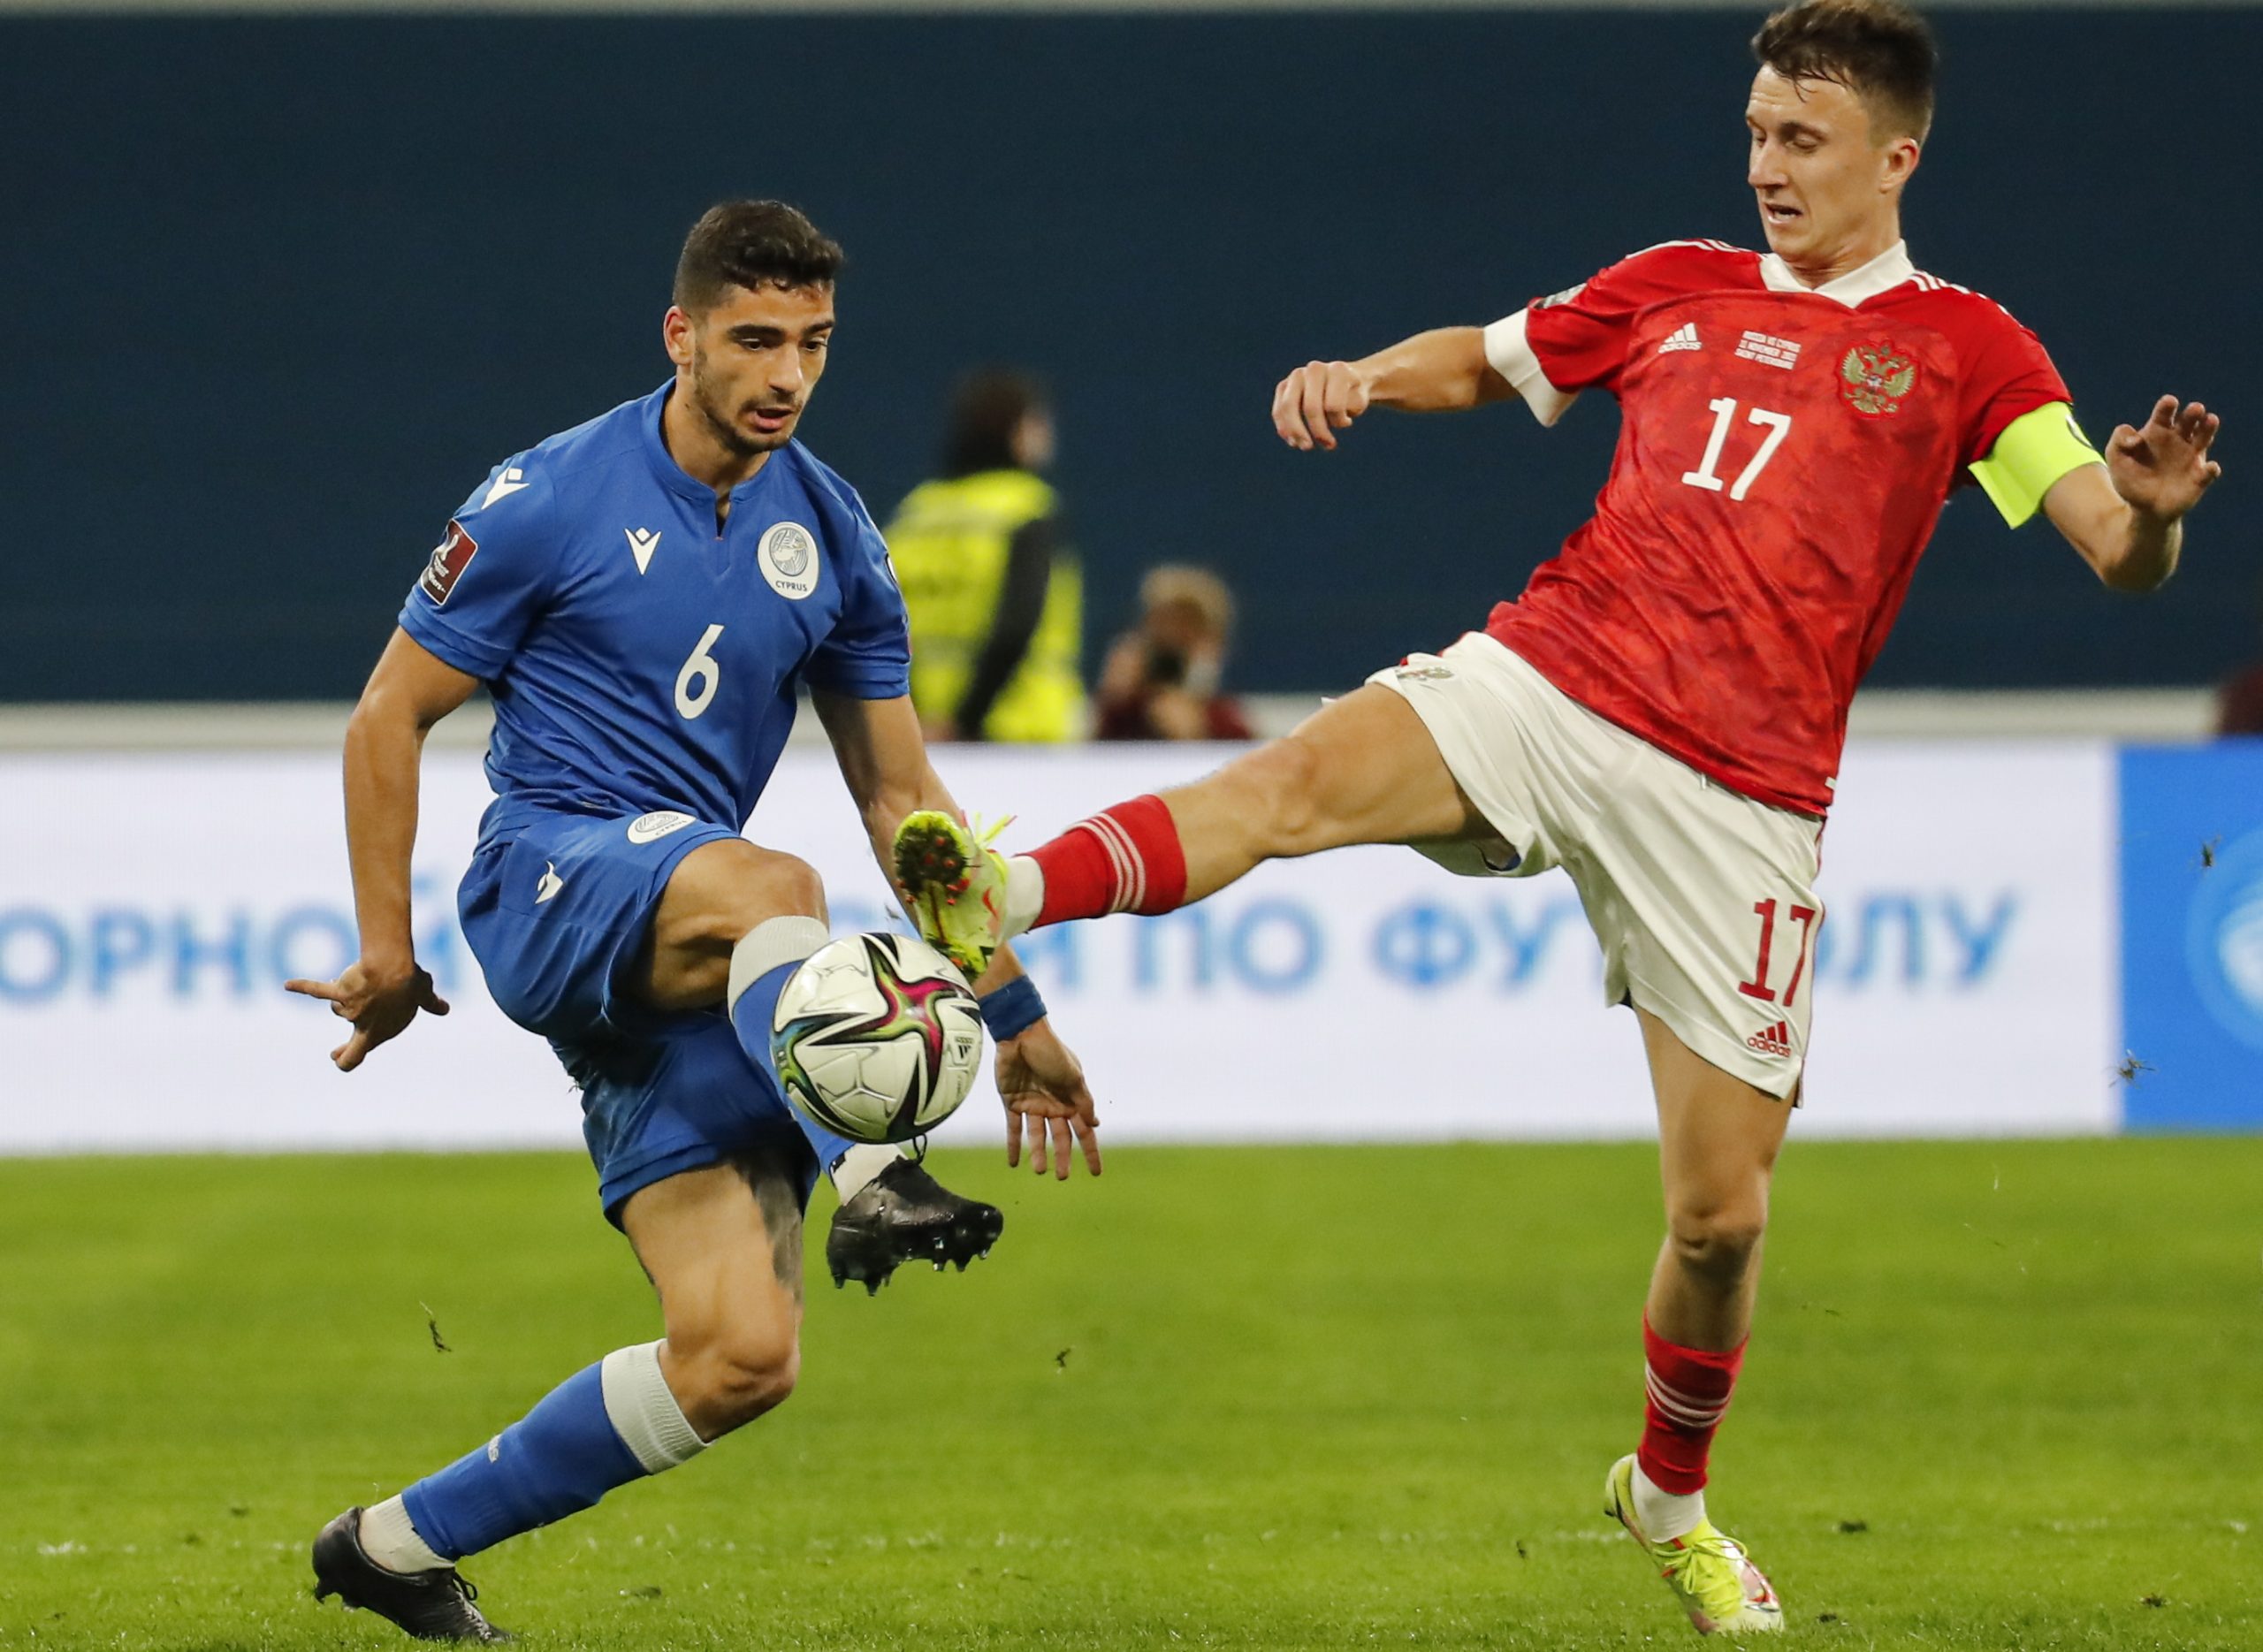 epa09576689 Aleksandr Golovin (R) of Russia in action against Paris Psaltis (L) of Cyprus during the FIFA World Cup 2022 group H qualifying soccer match between Russia and Cyprus in St.Petersburg, Russia, 11 November 2021.  EPA/Anatoly Maltsev